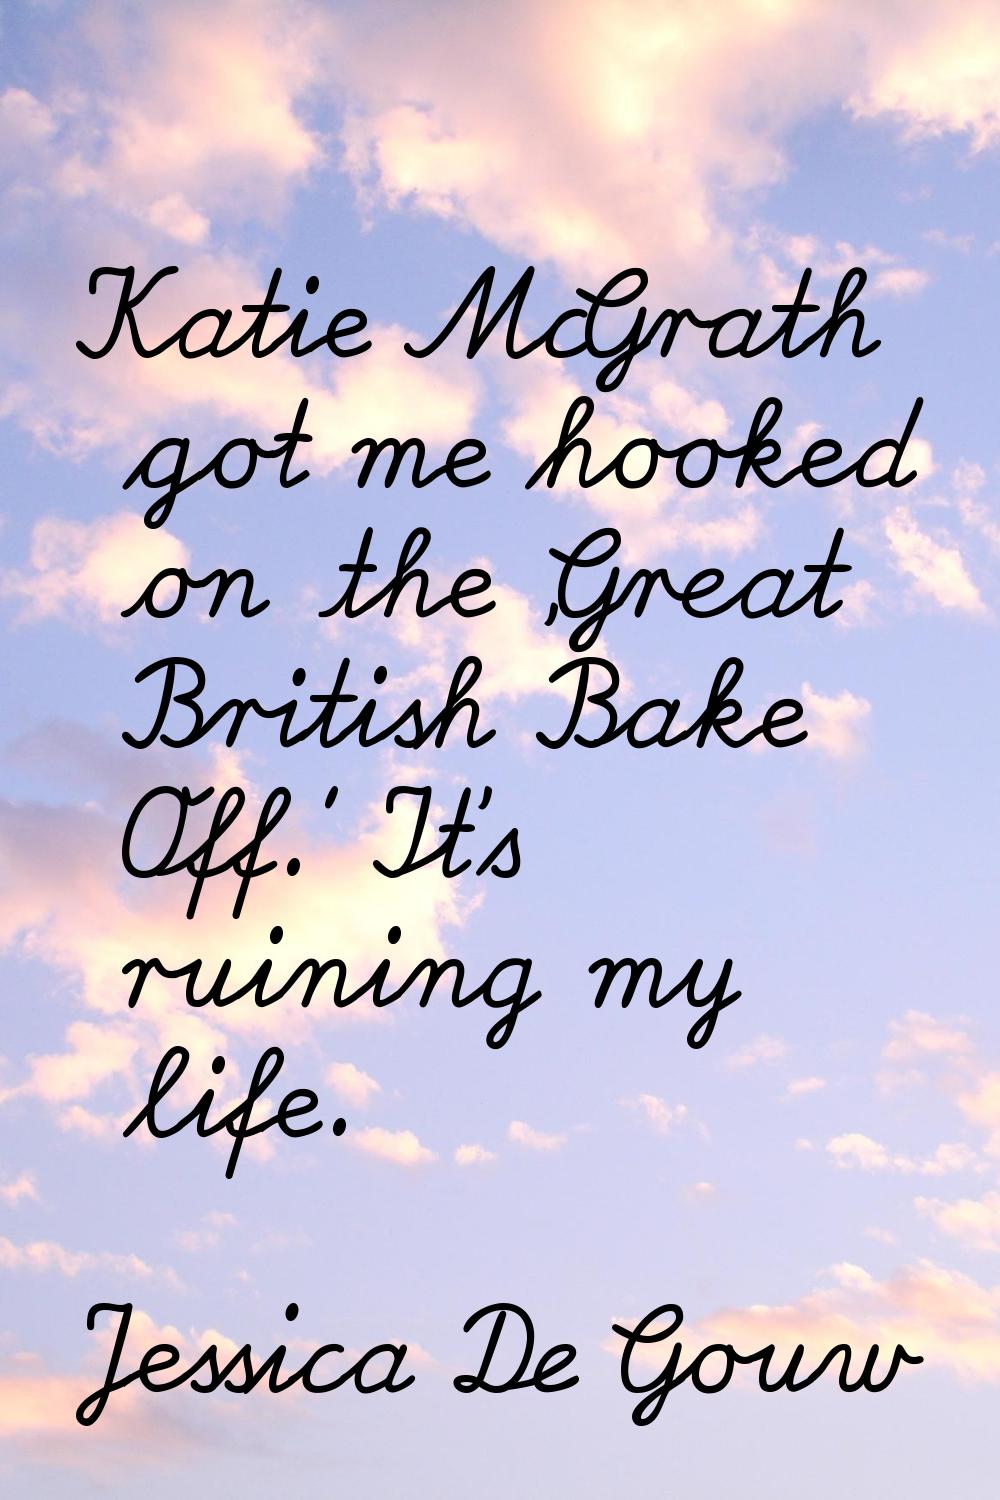 Katie McGrath got me hooked on the 'Great British Bake Off.' It's ruining my life.